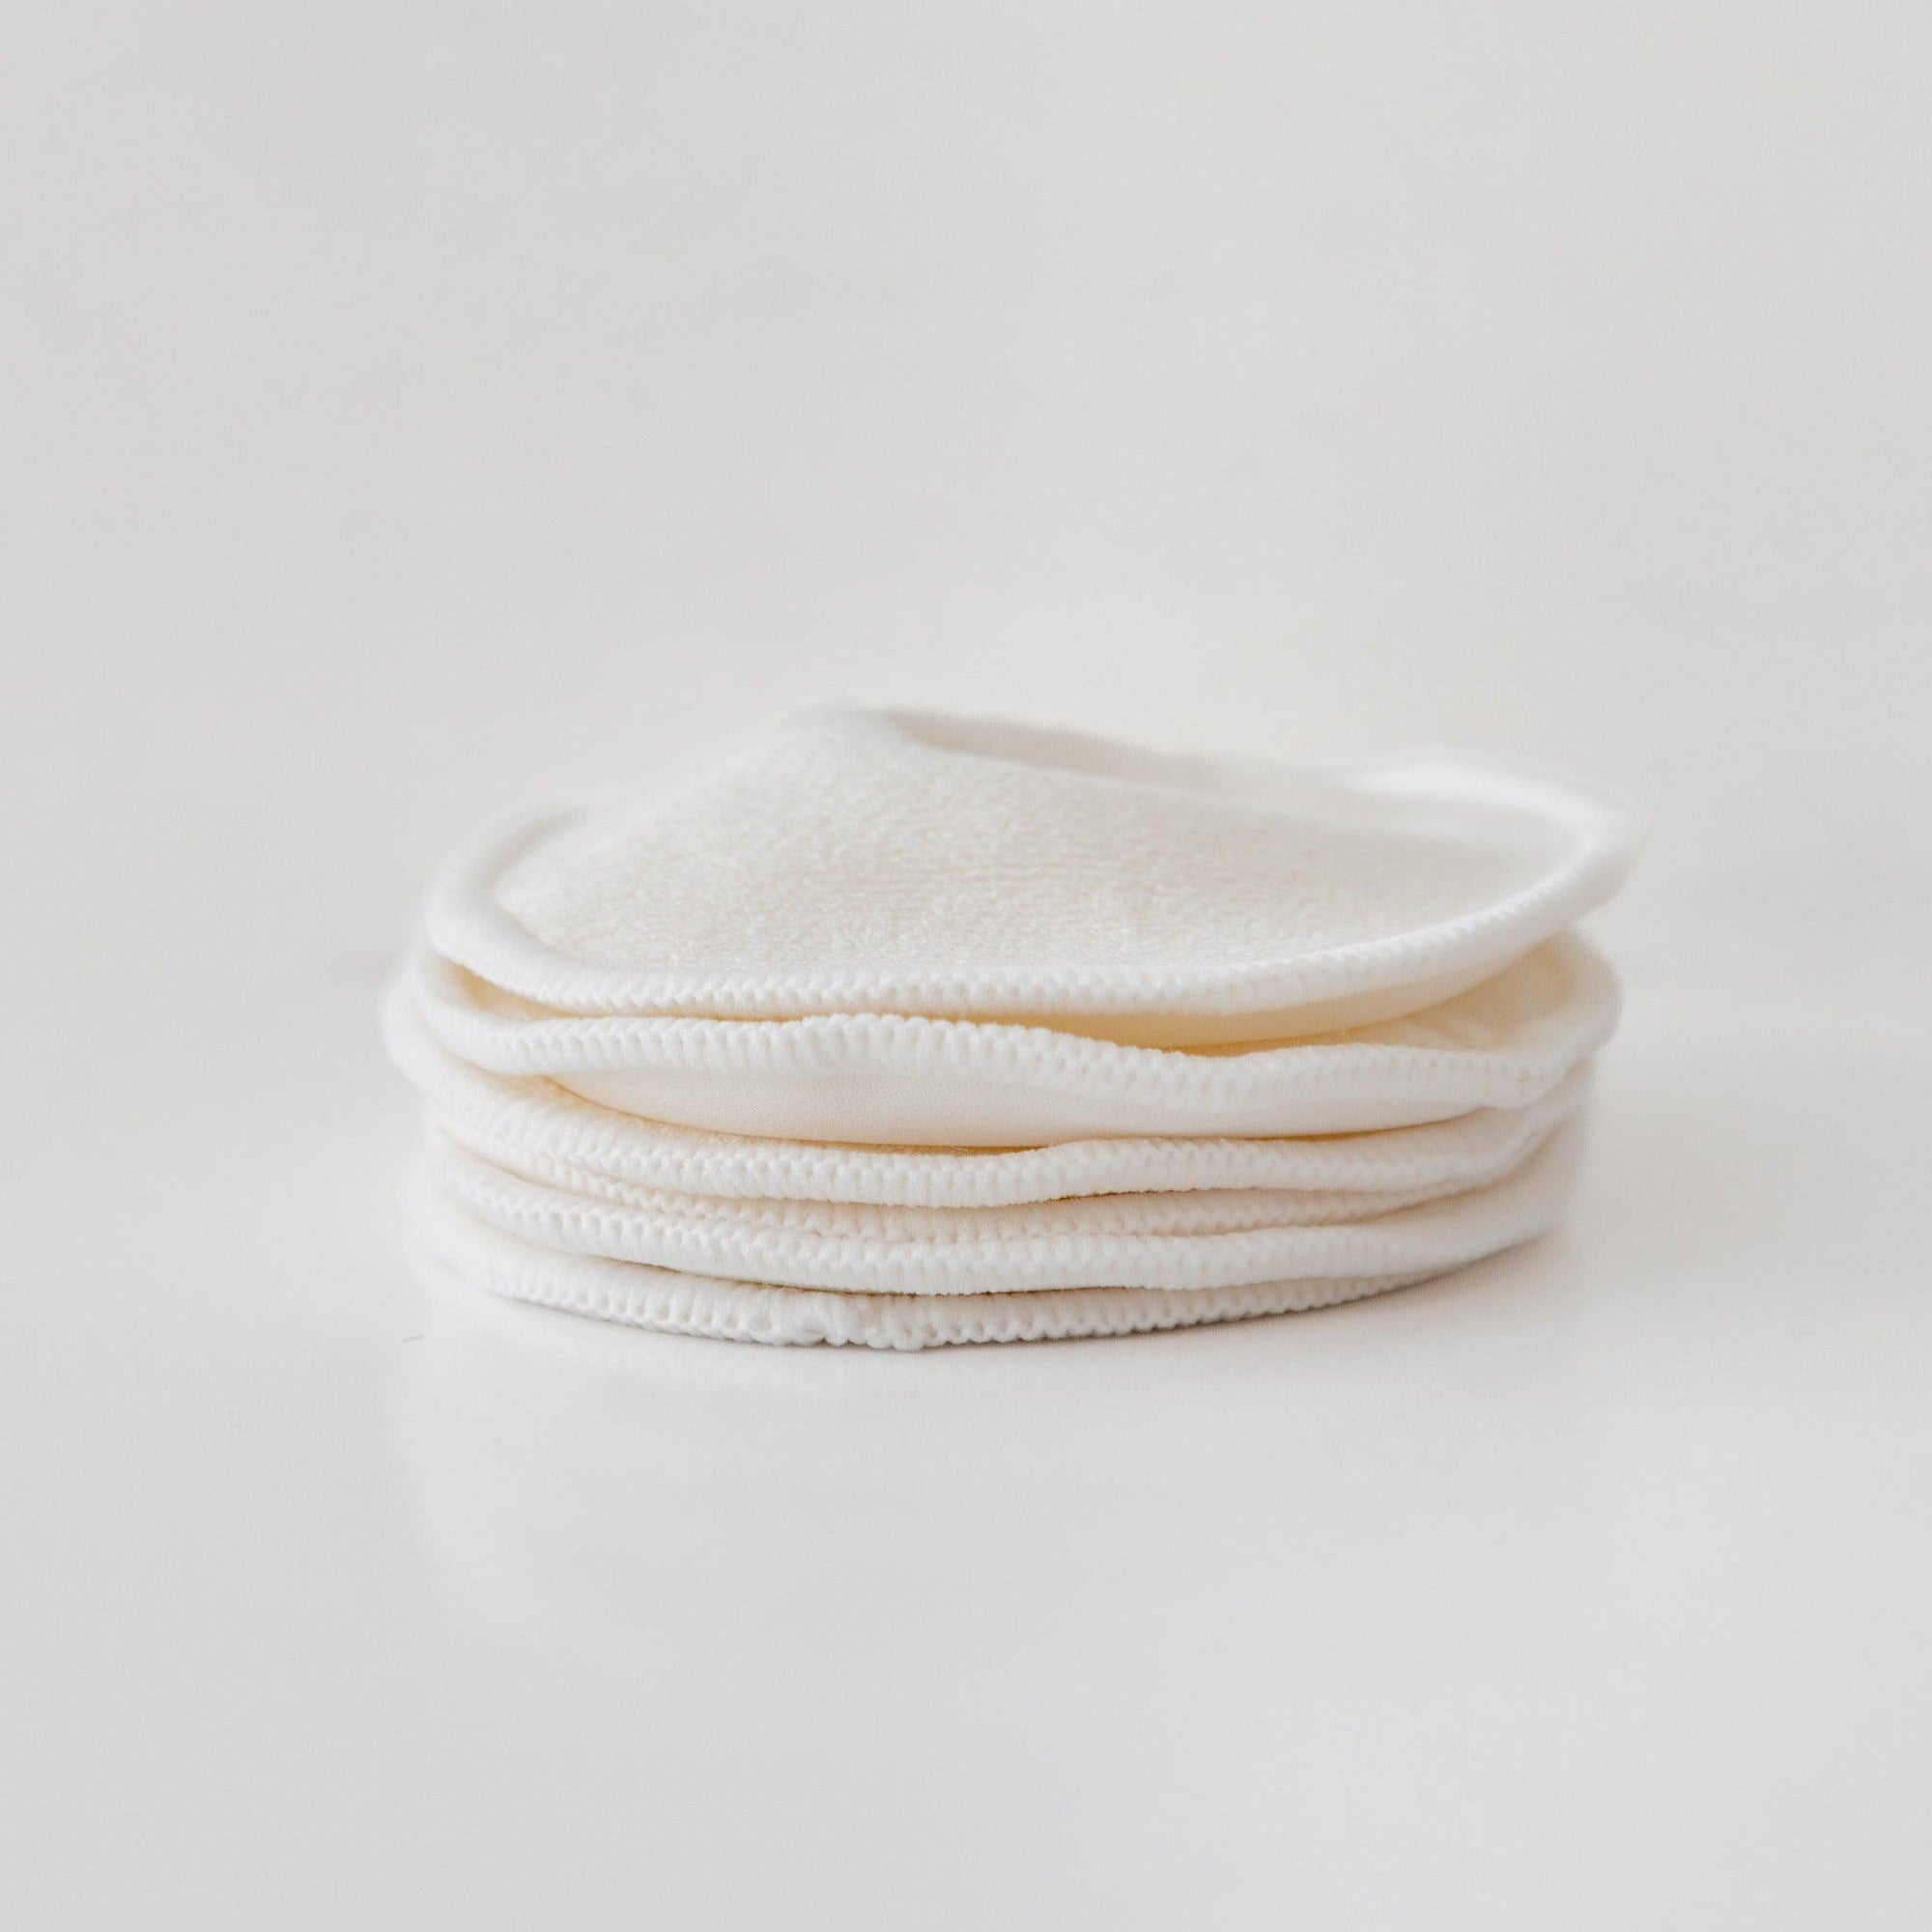 A stack of postpartum breast pads for nursing in Mammae bosom wearables showcased on a white surface.